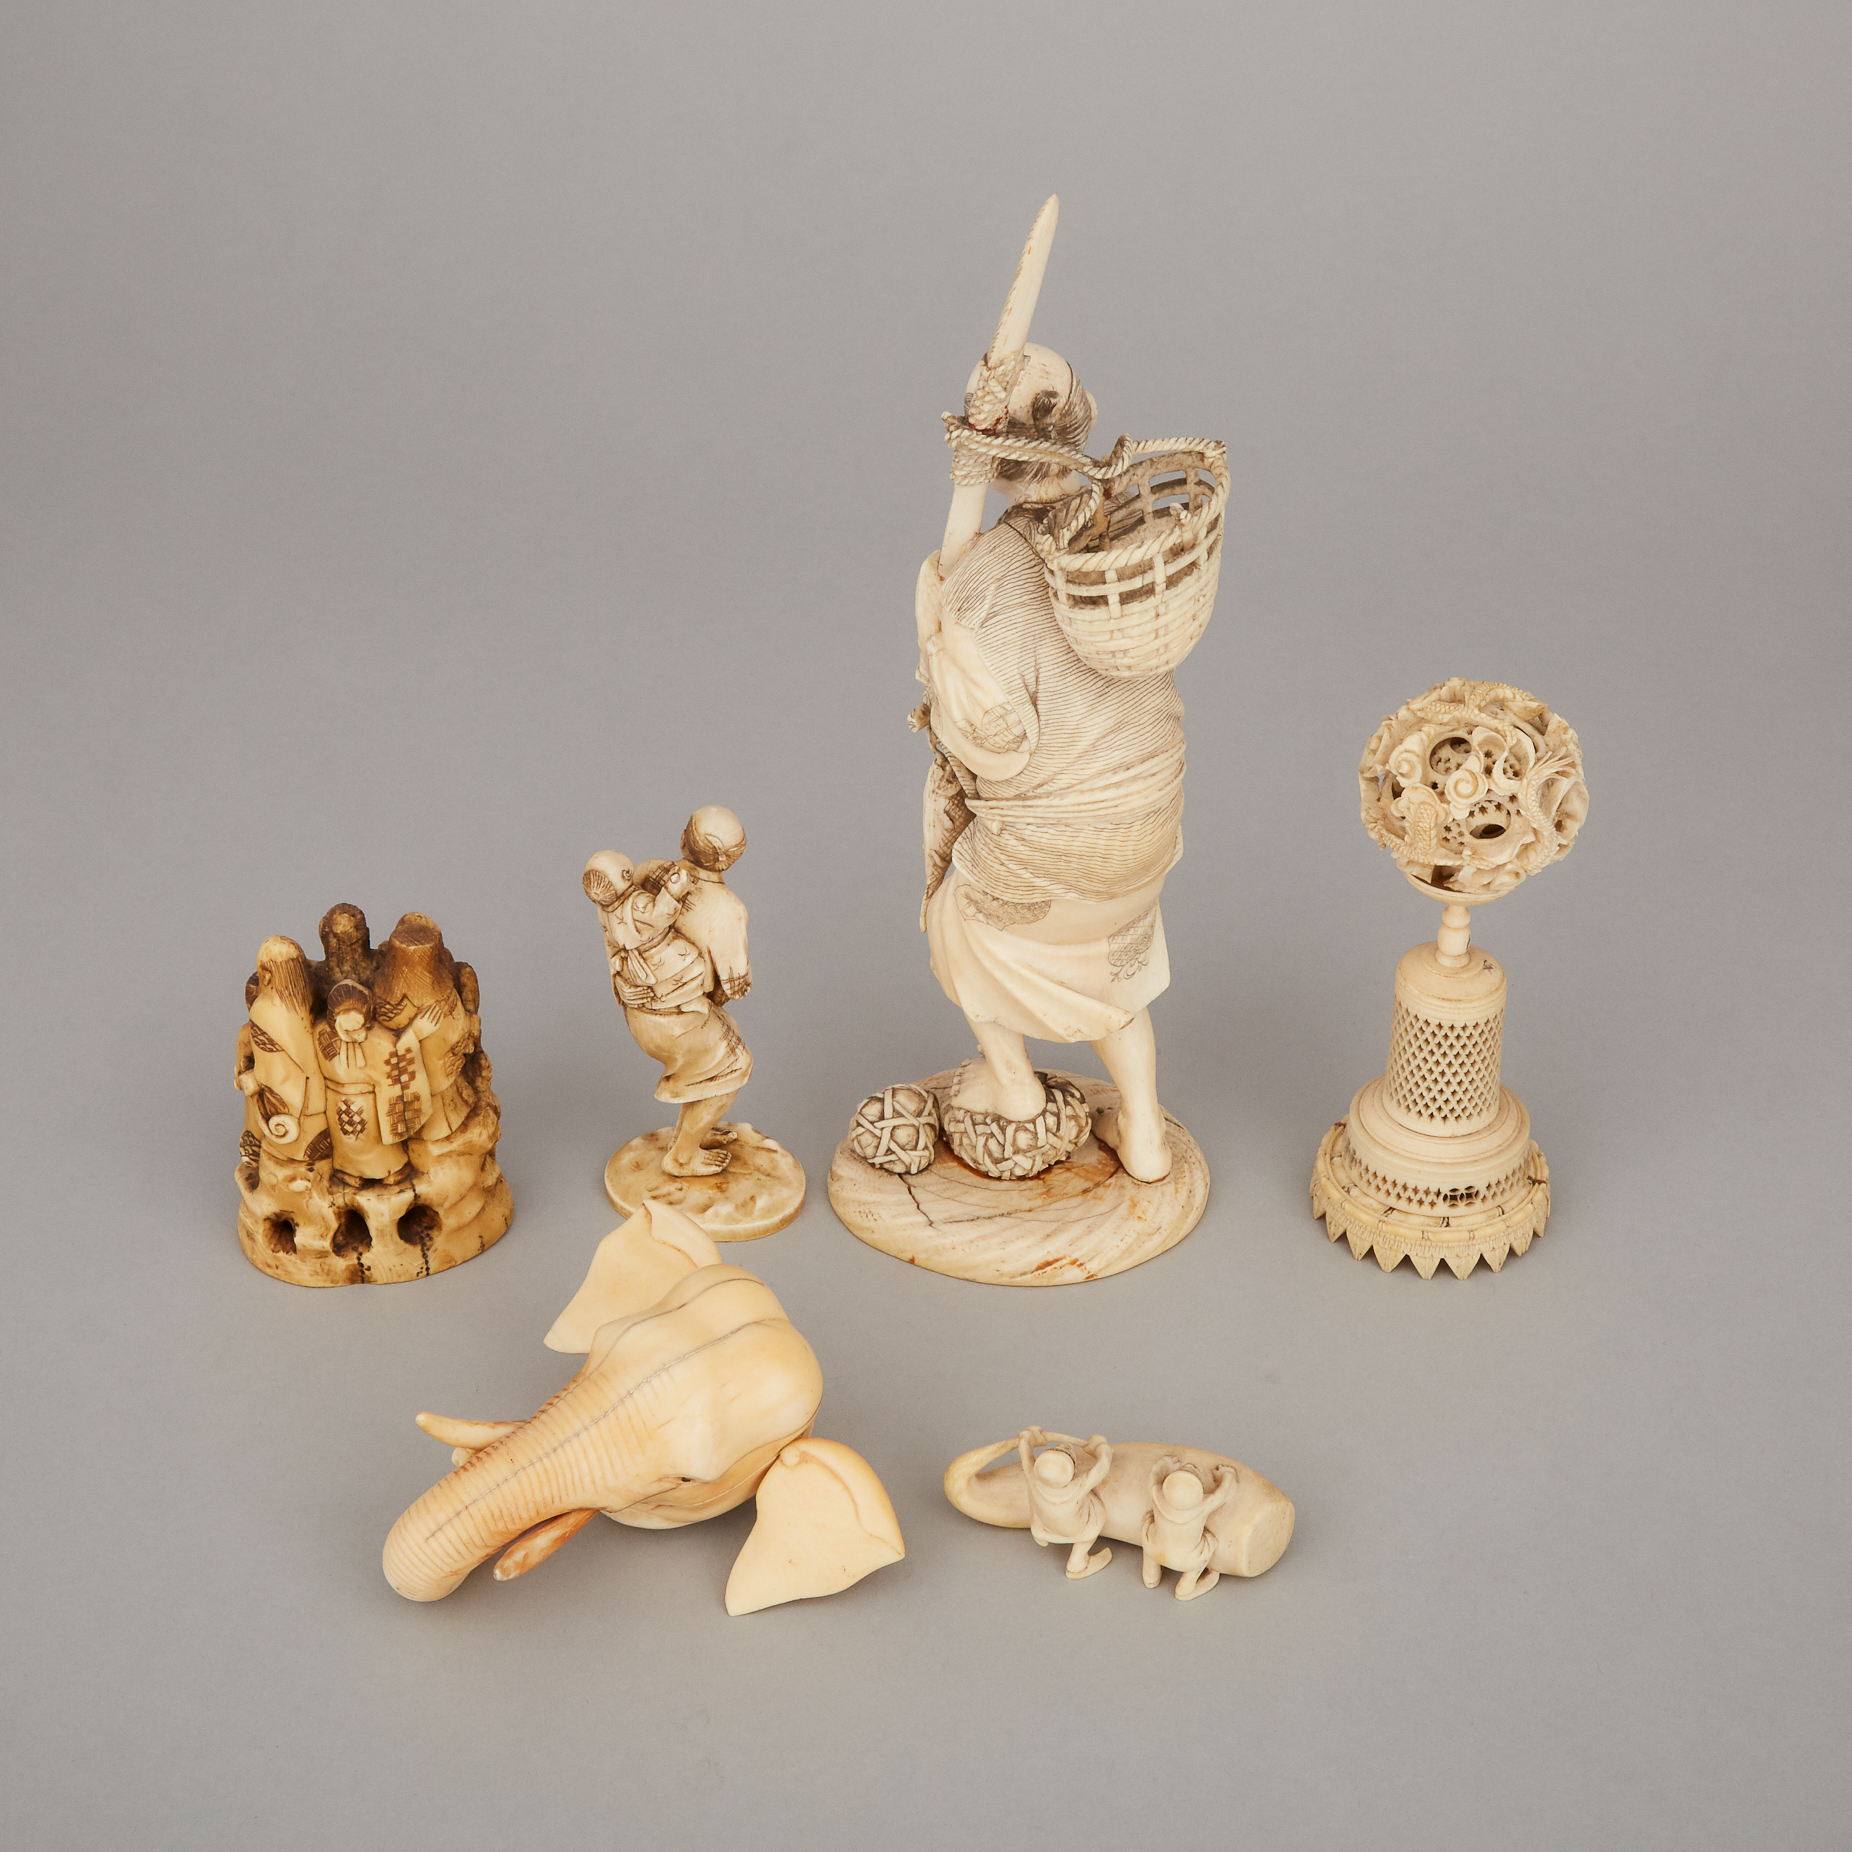 A Group of Six Japanese Ivory Carved Items, Late 19th/Early 20th Century